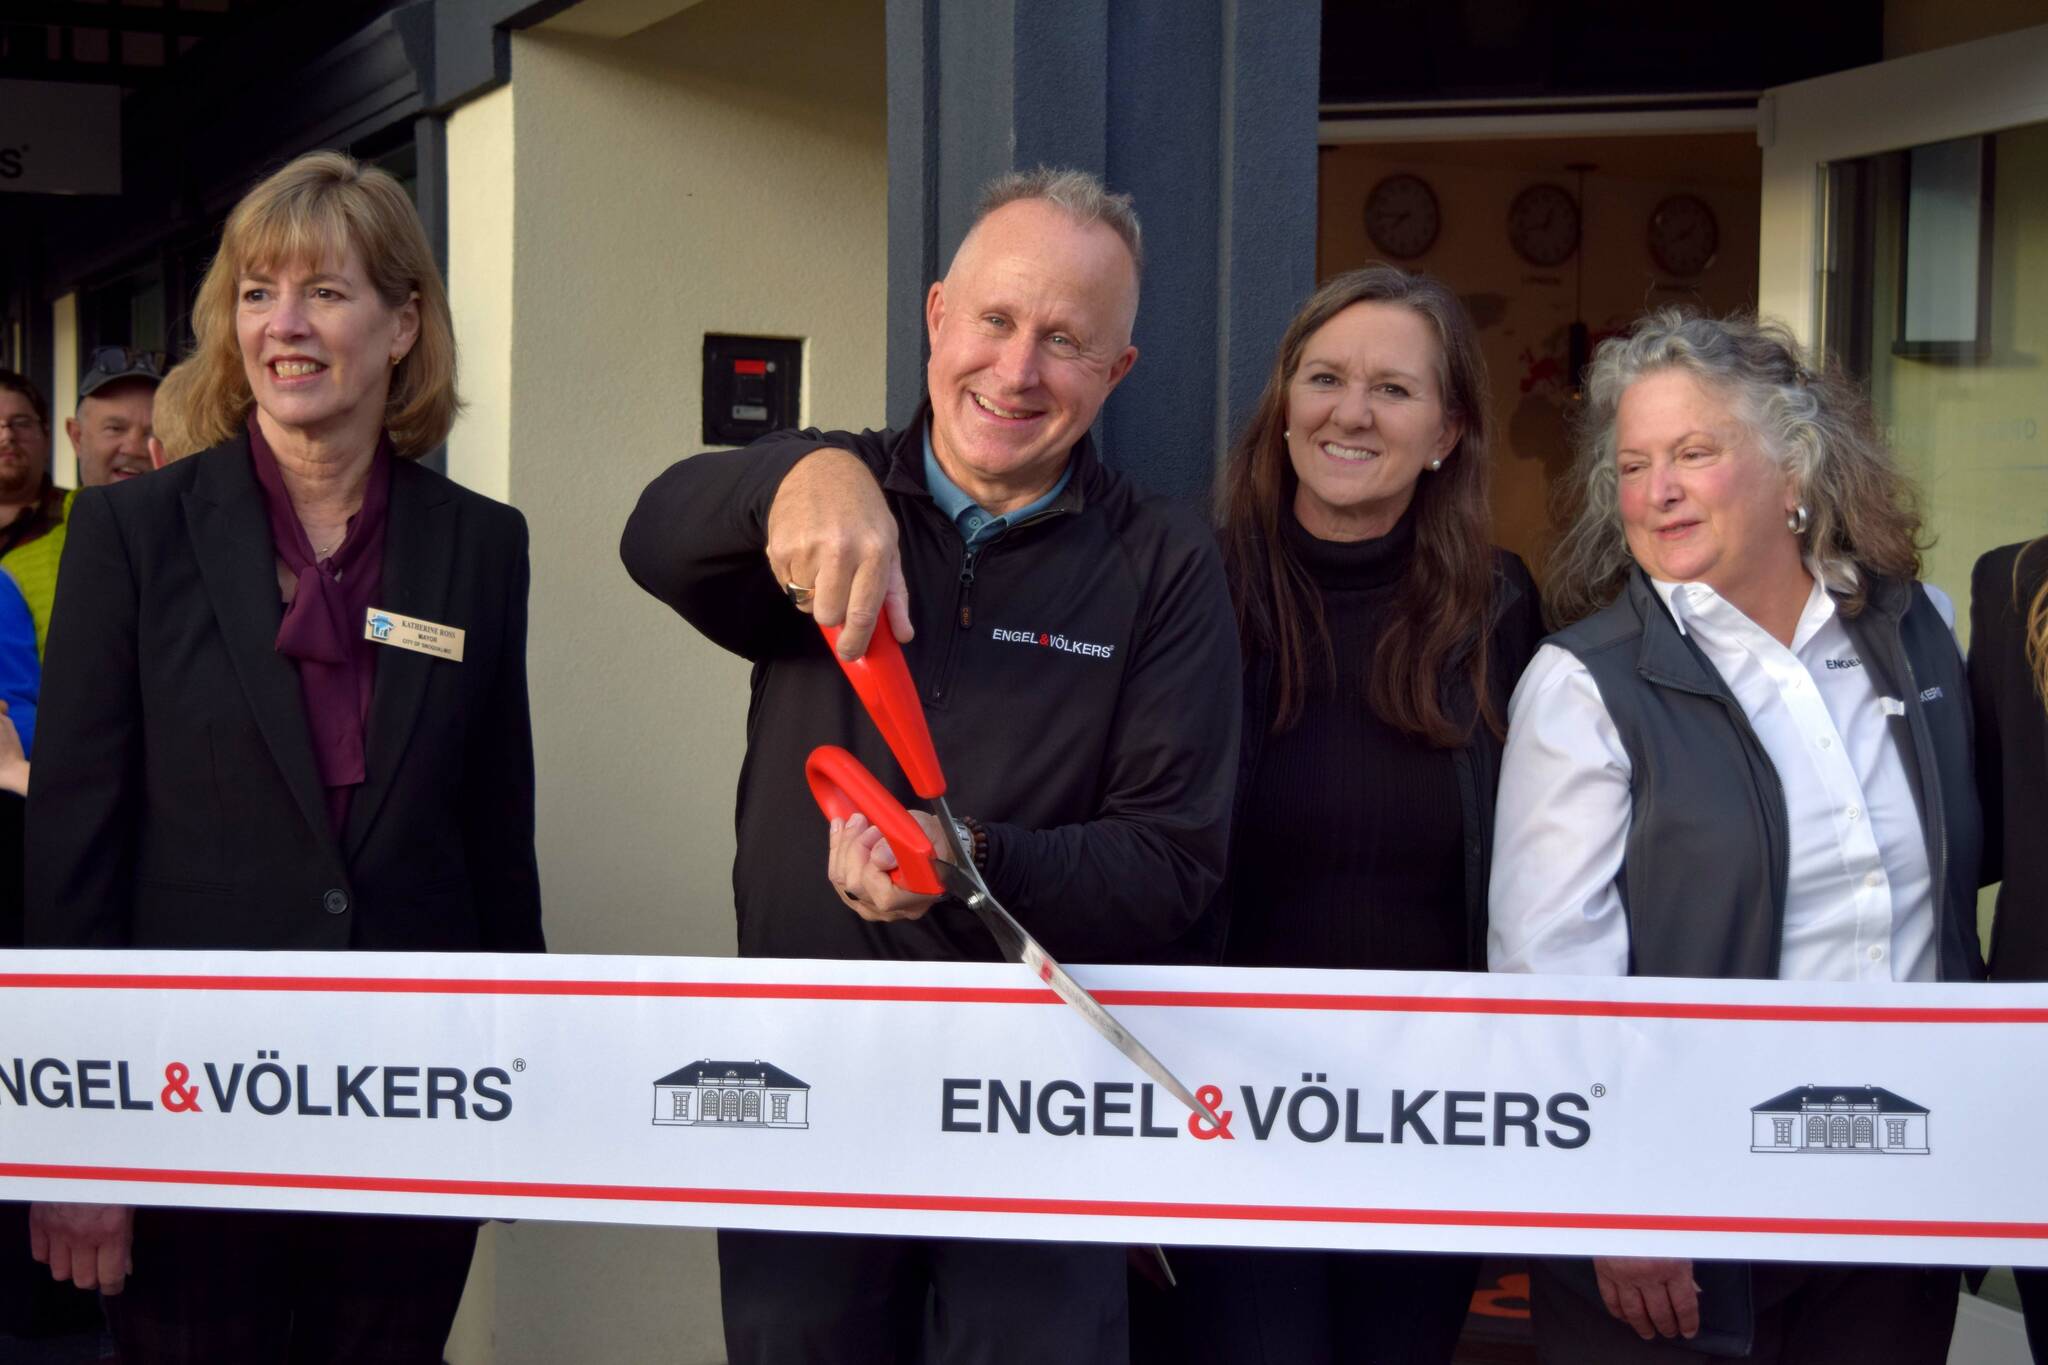 Conor Wilson / Valley Record.
Jonathan Pearlstein, owner of Engel & Volkers Snoqualmie Valley, celebrates grand opening of his brokerage alongside his wife, Michelle (center right), colleague Kathleen Irish (right) and Snoqualmie Mayor Katherine Ross (left).